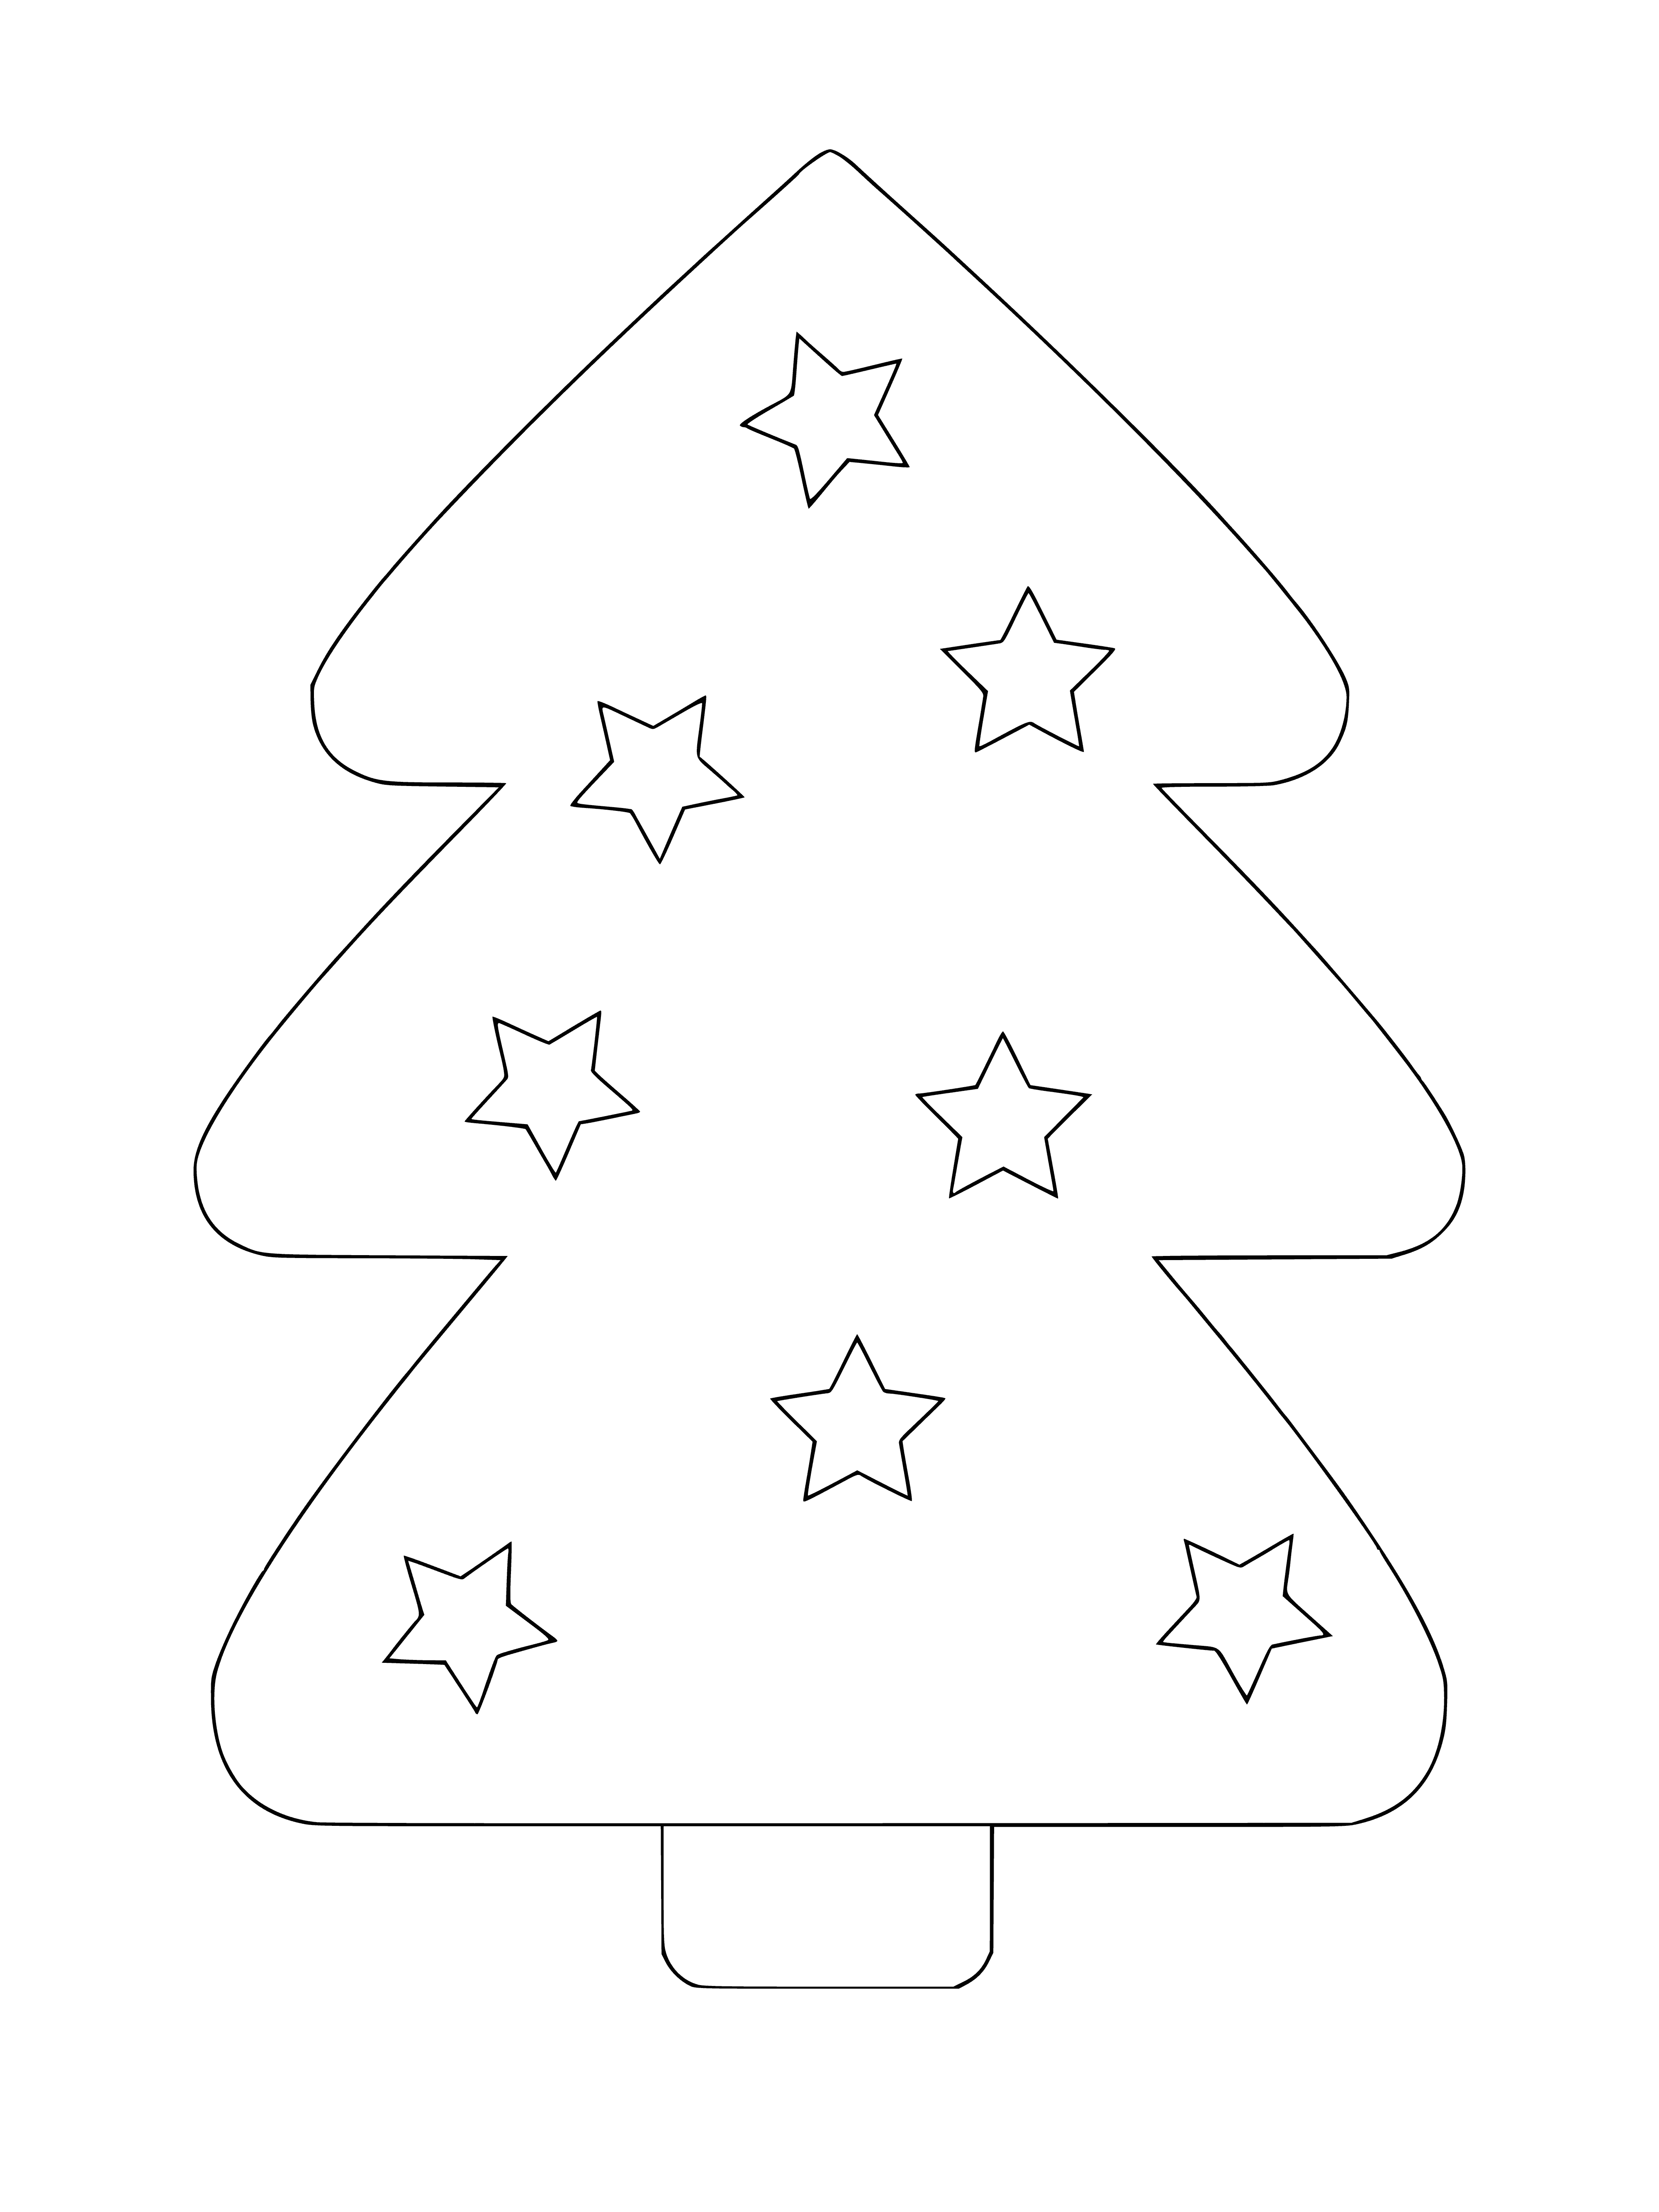 coloring page: Families gathering 'round a Christmas tree with a star on top, & presents wrapped in festive colors.